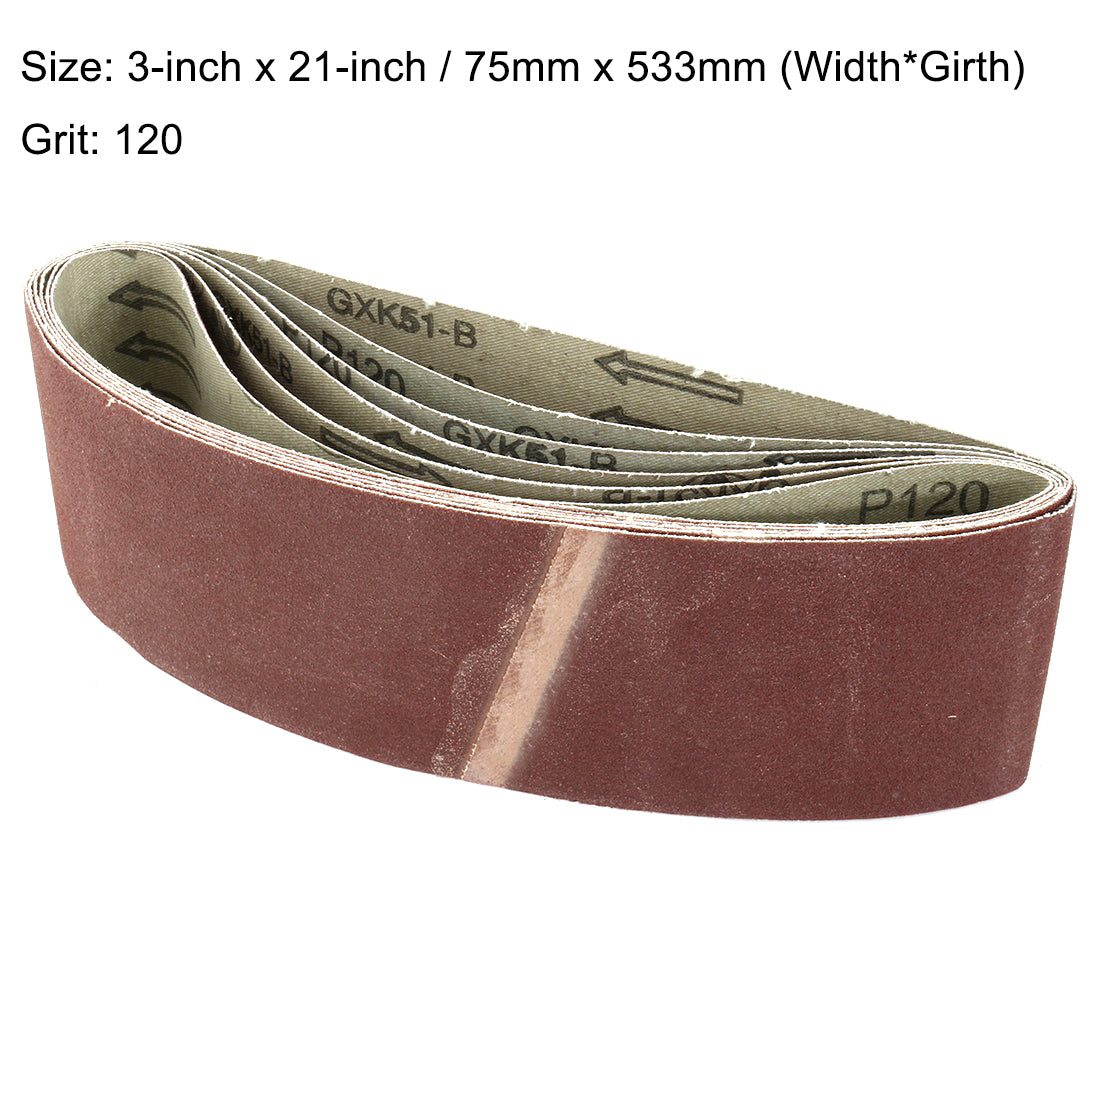 uxcell Uxcell 3-Inch x 21-Inch Aluminum Oxide Sanding Belt 120 Grits Lapped Joint 6pcs